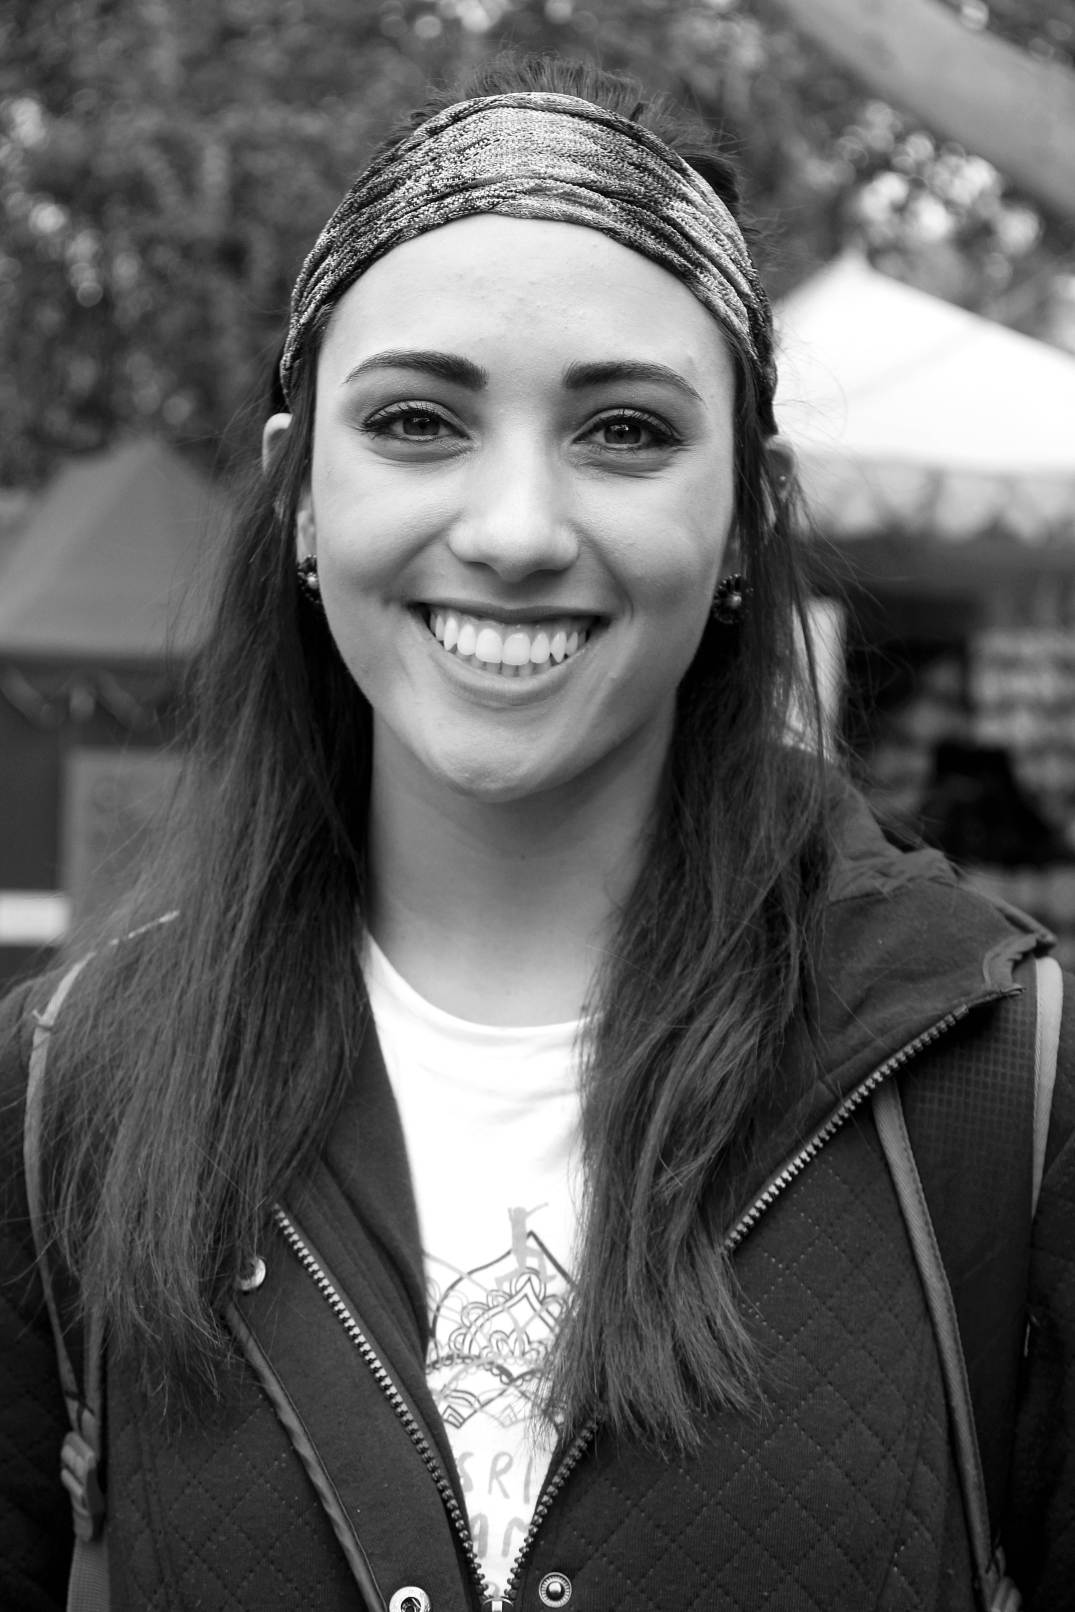 Katelyn-happy women's day-streets of india-women portraits-black and white-beauty (10)